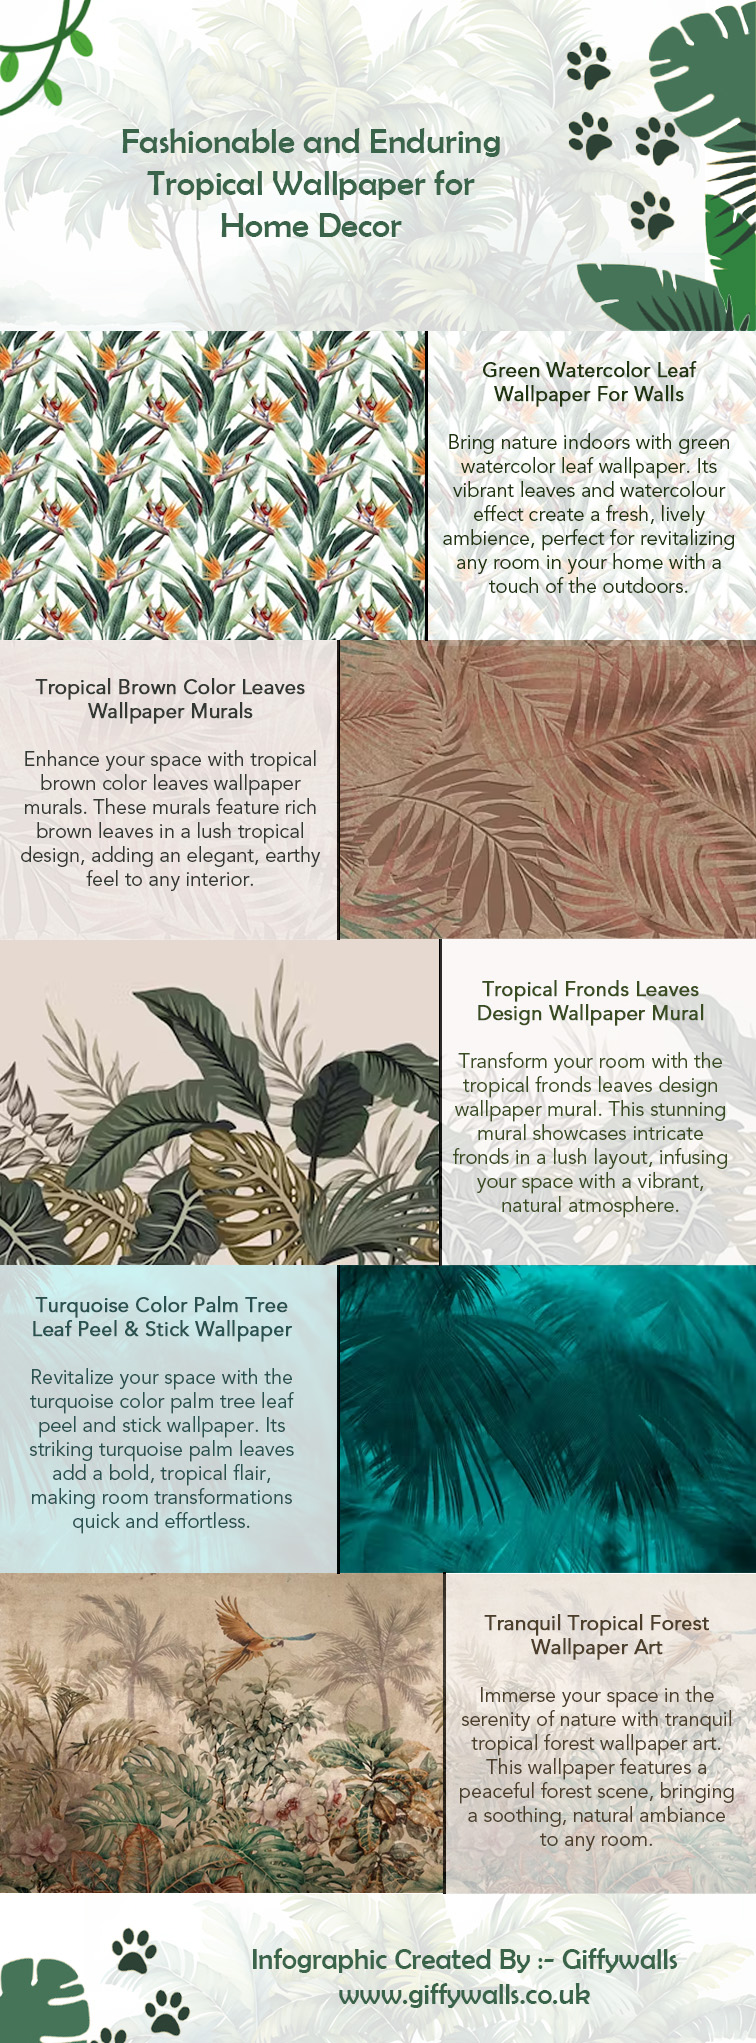 Tropical Wallpaper for Home Decor Infographic